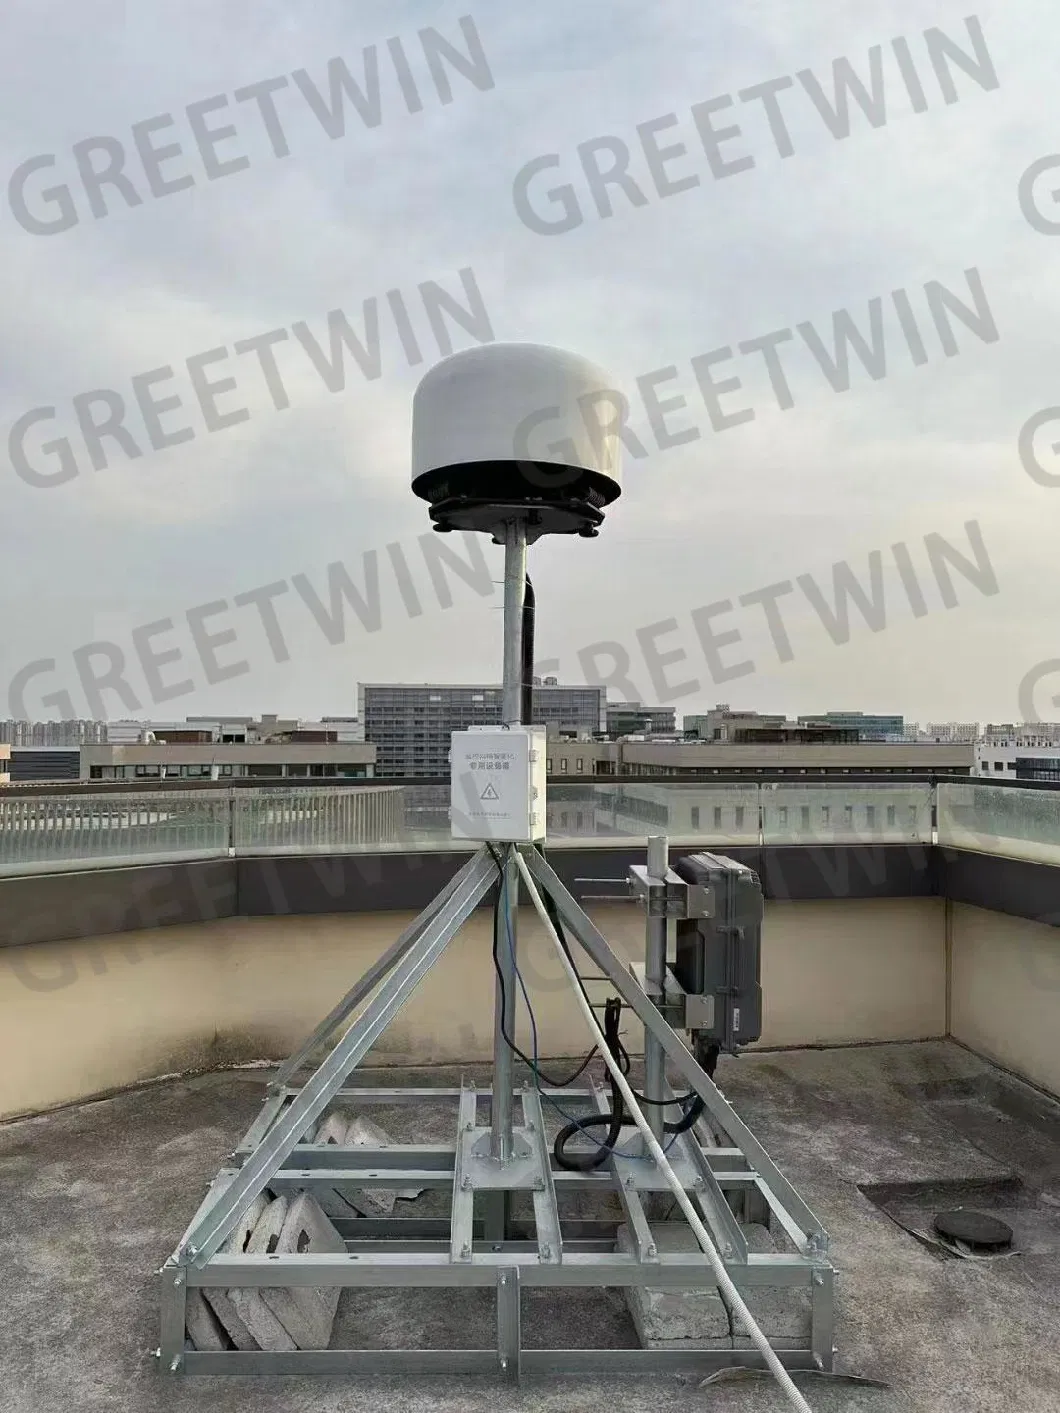 Long Range Greetwin Drone Jamming &amp; Detection Integrate System